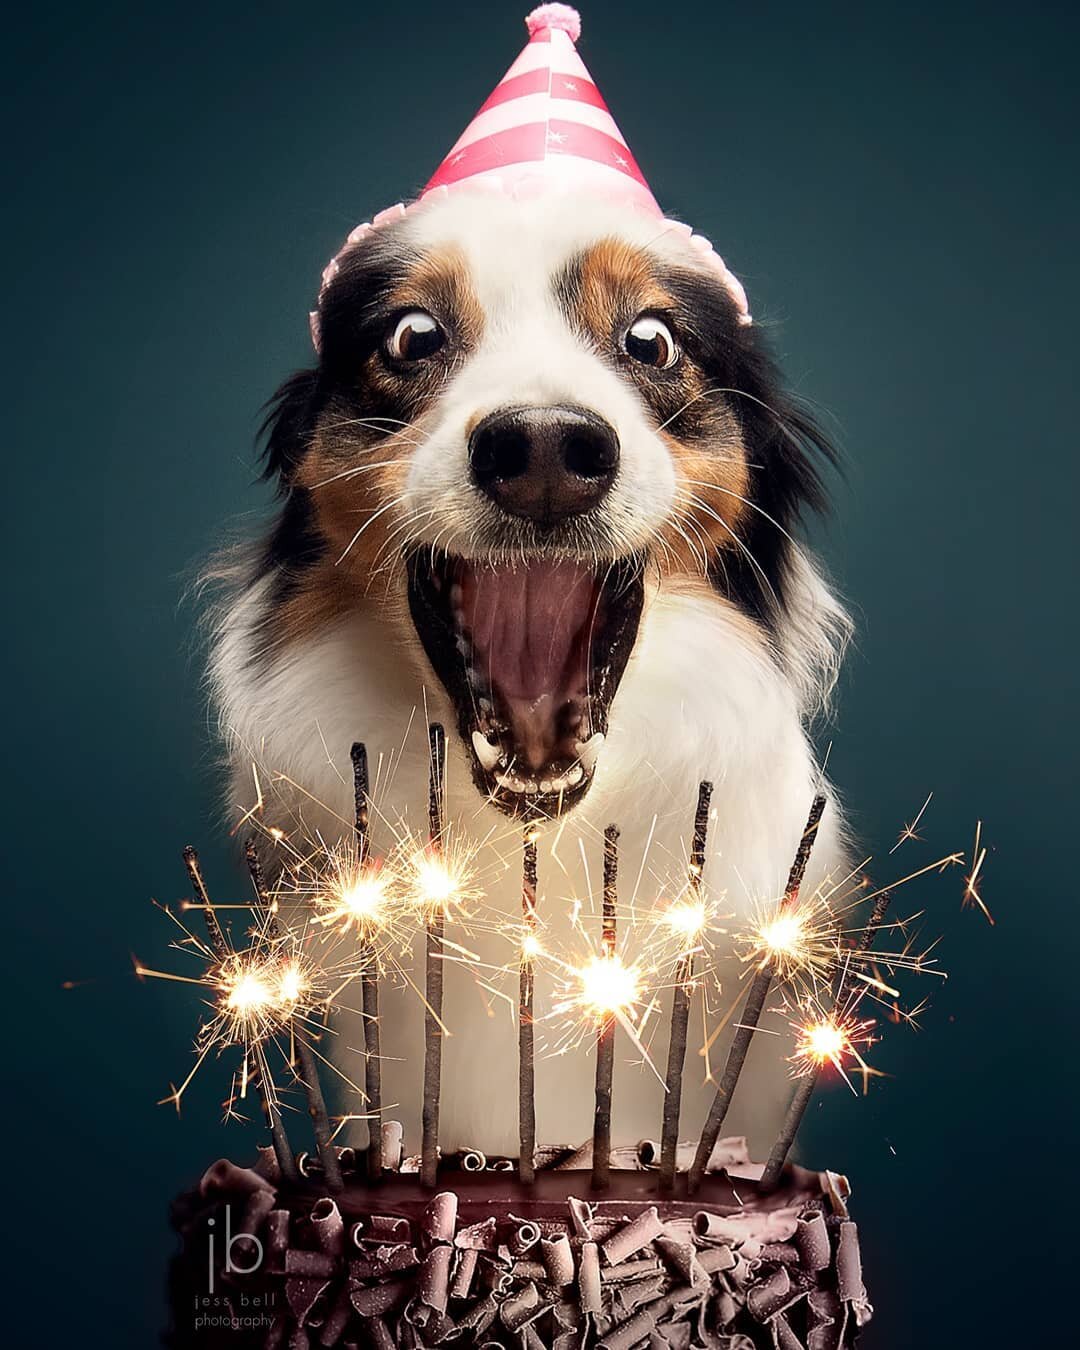 BIRTHDAY!
Featuring Cohen the Australian Shepherd! 
&copy; @jessbellphotography 
Contact for use.

I shot this to mark my Aussie Cohen's upcoming 11th birthday, but wanted to share it a few weeks early here.  I wanted to recreate a shot I took of her